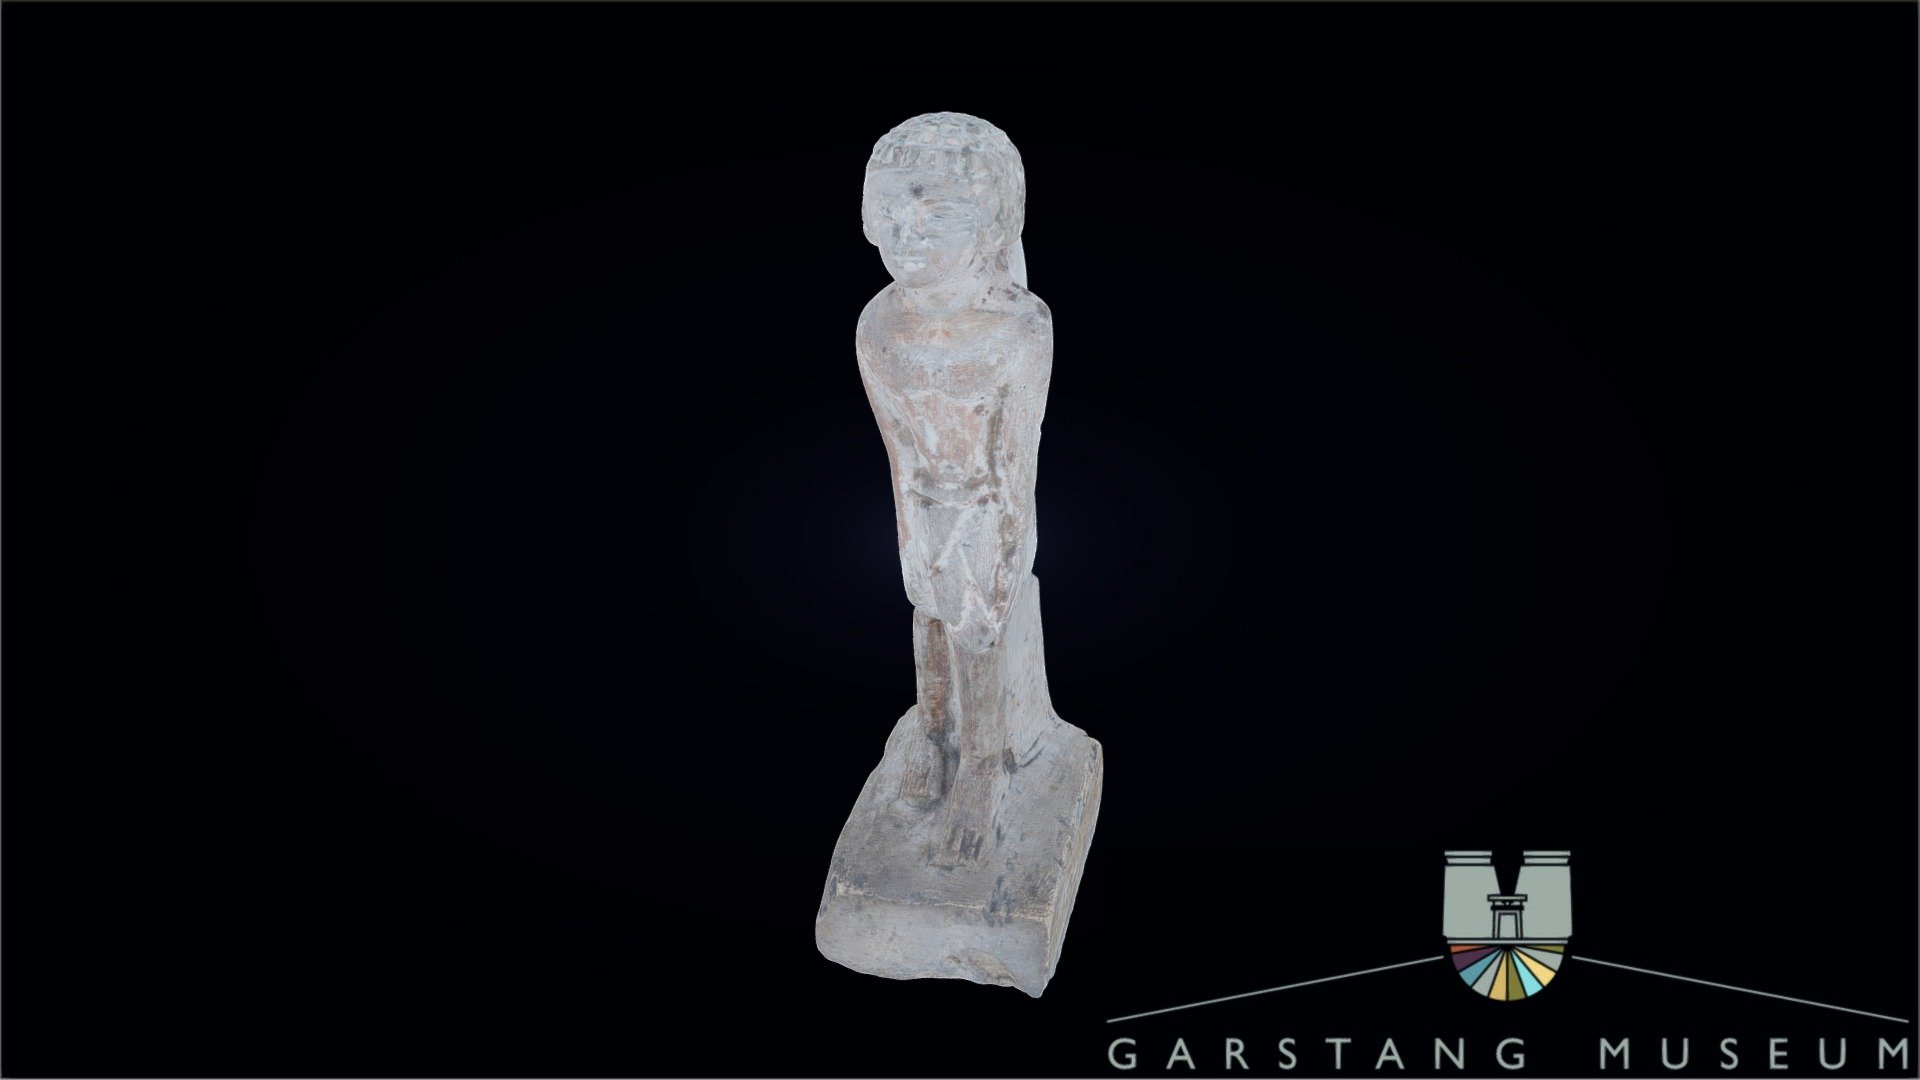 A small, limestone figure of the soldier Sa-Djehuty son of Sat-Djehuty from the ancient Egyptian site of Abydos. Excavated by John Garstang in 1908, the statuette was found in tomb 643. It likely dates to the Second Intermediate Period.

Measuring just under 20cm, Sa-Djehuty wears a heavy wig and a kilt with a plain belt. Prior to excavation, the figure was broken and has now been repaired. The appearance of the two parts is noticeably different, with the upper half appearing bleached, while the lower half bears extensive traces of paint around the bands of hieroglyphs. Red paint is visible on the legs and torso.

The text reads &ldquo;An offering which the King gives to Osiris for the ka of the living one of the town, Sa-Djehuty, born of Sat-Djehuty, by his sister who causes that his name live, the lady of the house, Beki.

Snape (1994) suggests that the kilt is indicative of a military procession, read more here.

Accession Number: E.610

Photography and Model Credit: Charlotte Sargent - Statuette of Sa-Djehuty - 3D model by Garstang Museum of Archaeology (@garstang) 3d model